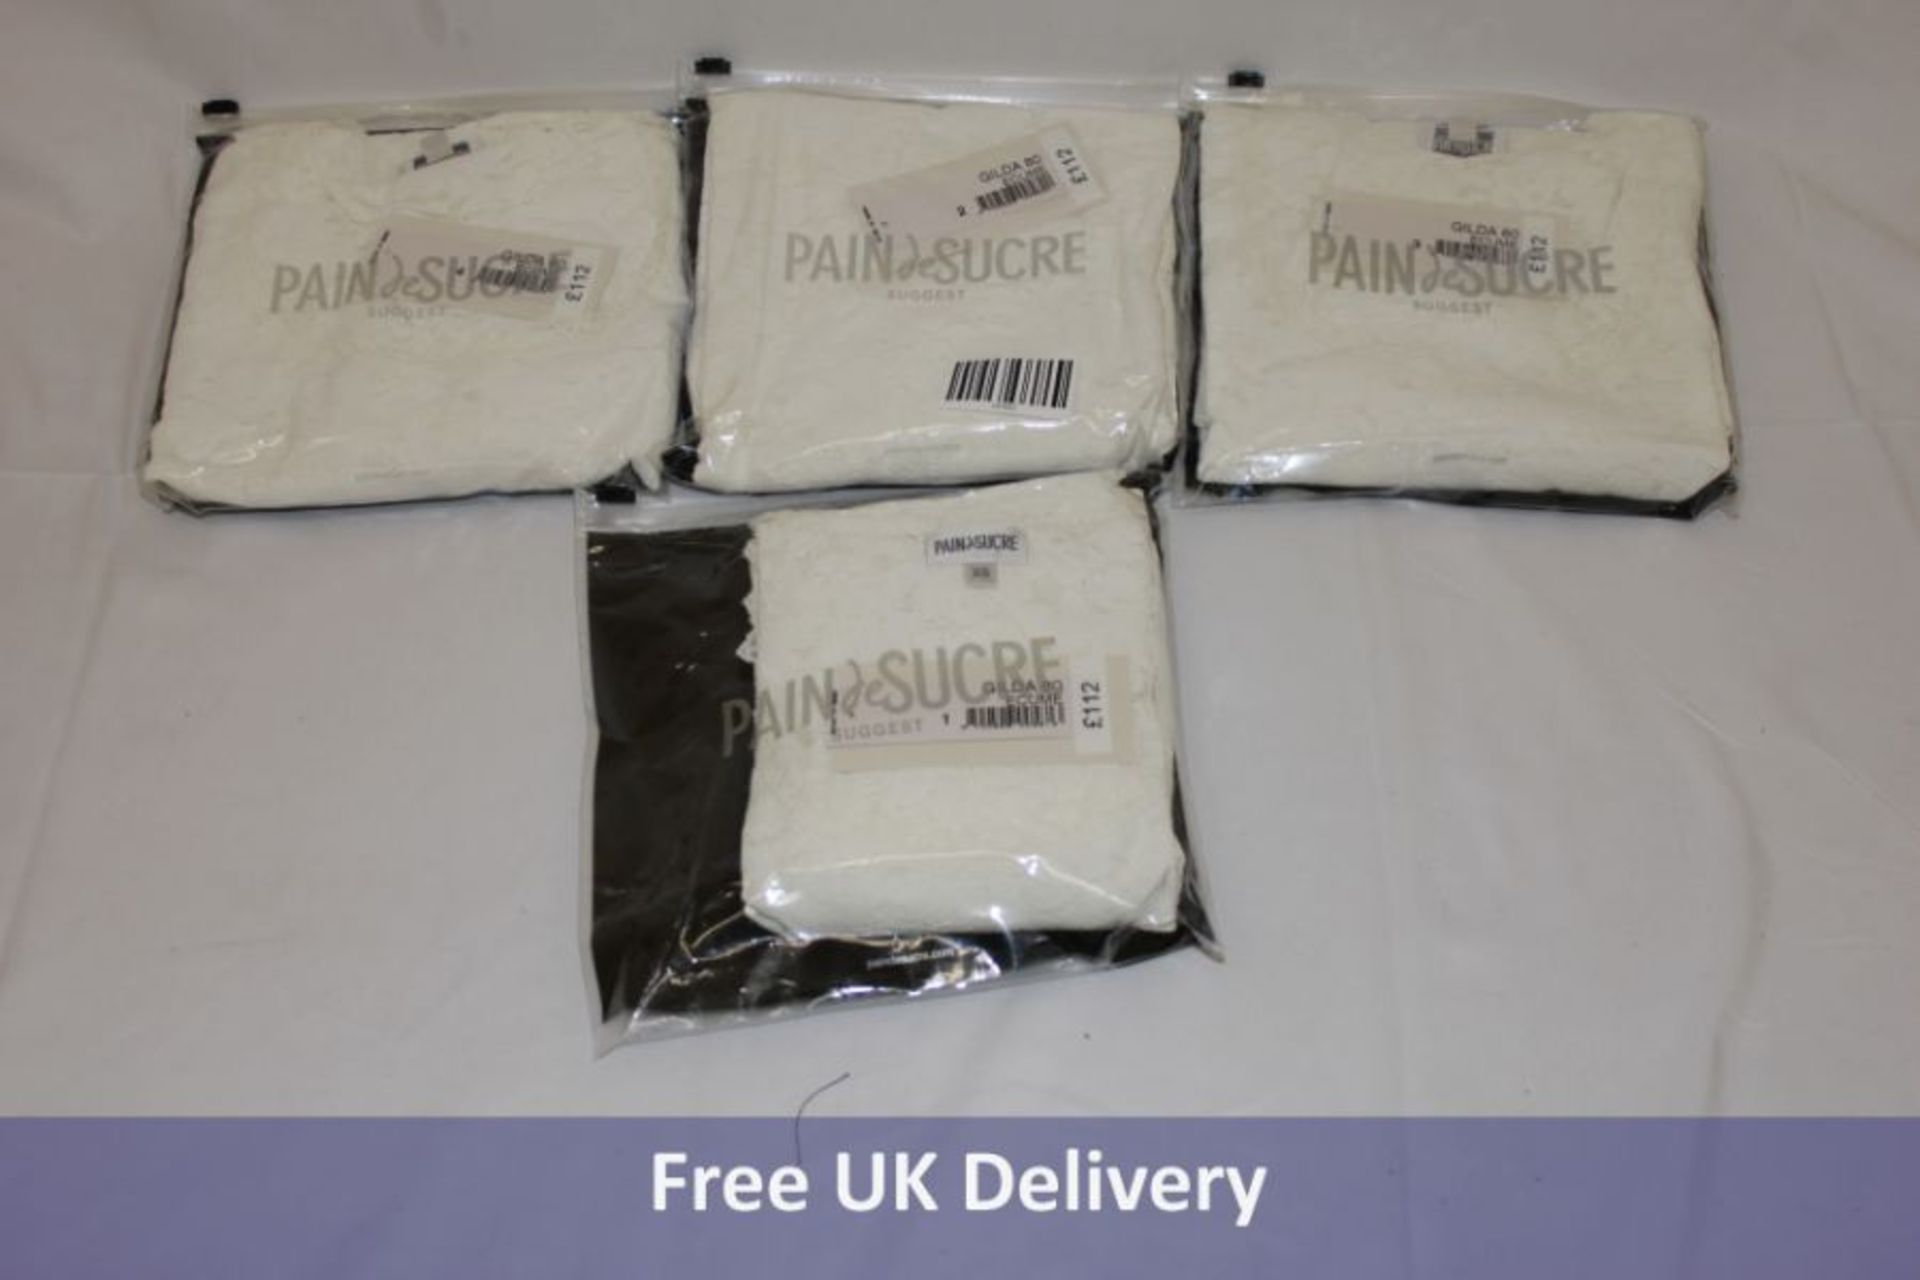 Four Pain De Sucre Gilda 80 Ecume Long Sleeved Tops, White, to include 1x XS, 1x S, 1x M and 1x L